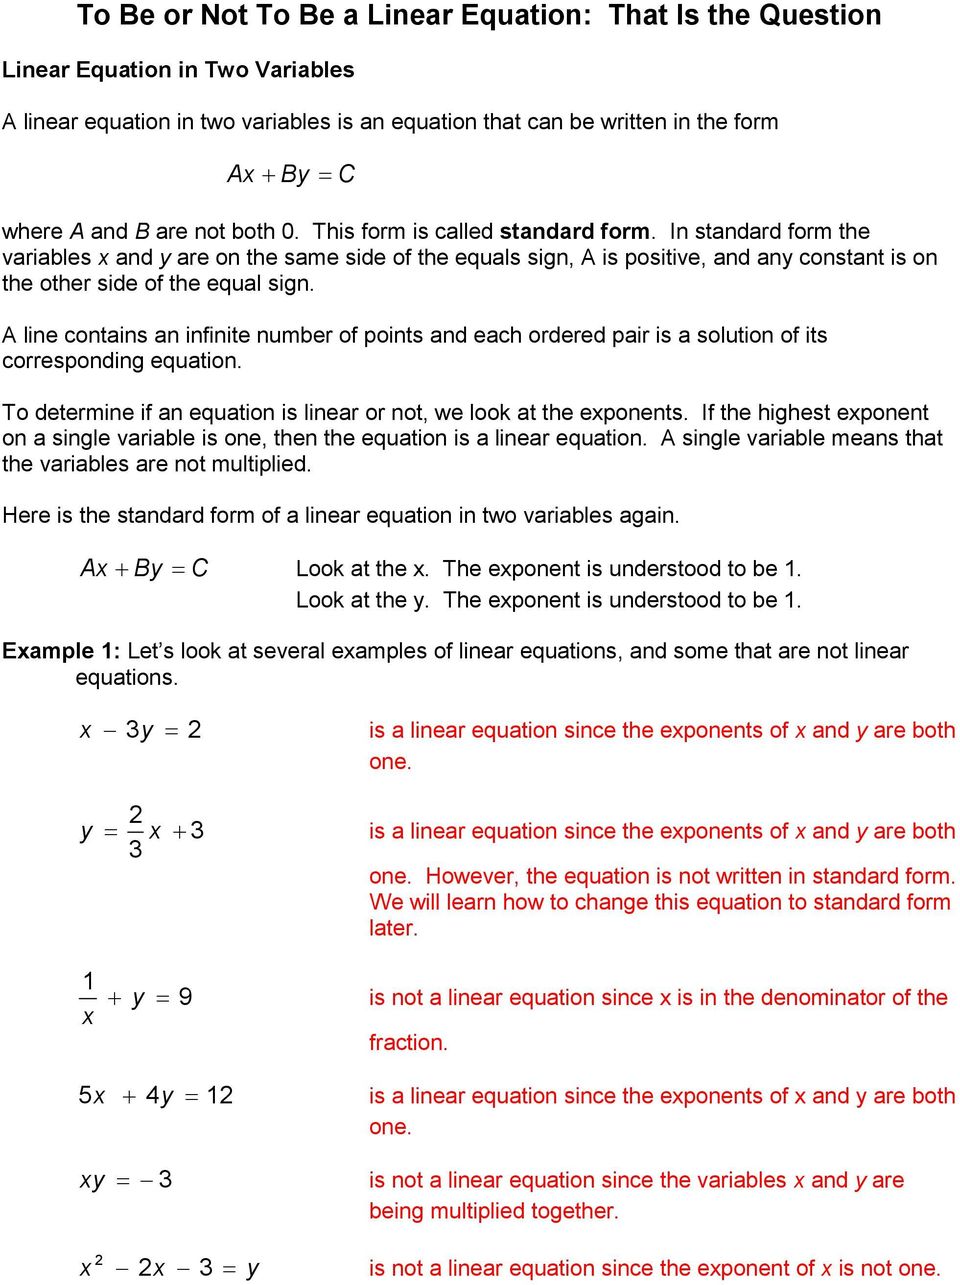 A line contains an infinite number of points and each ordered pair is a solution of its corresponding equation. To determine if an equation is linear or not, we look at the eponents.